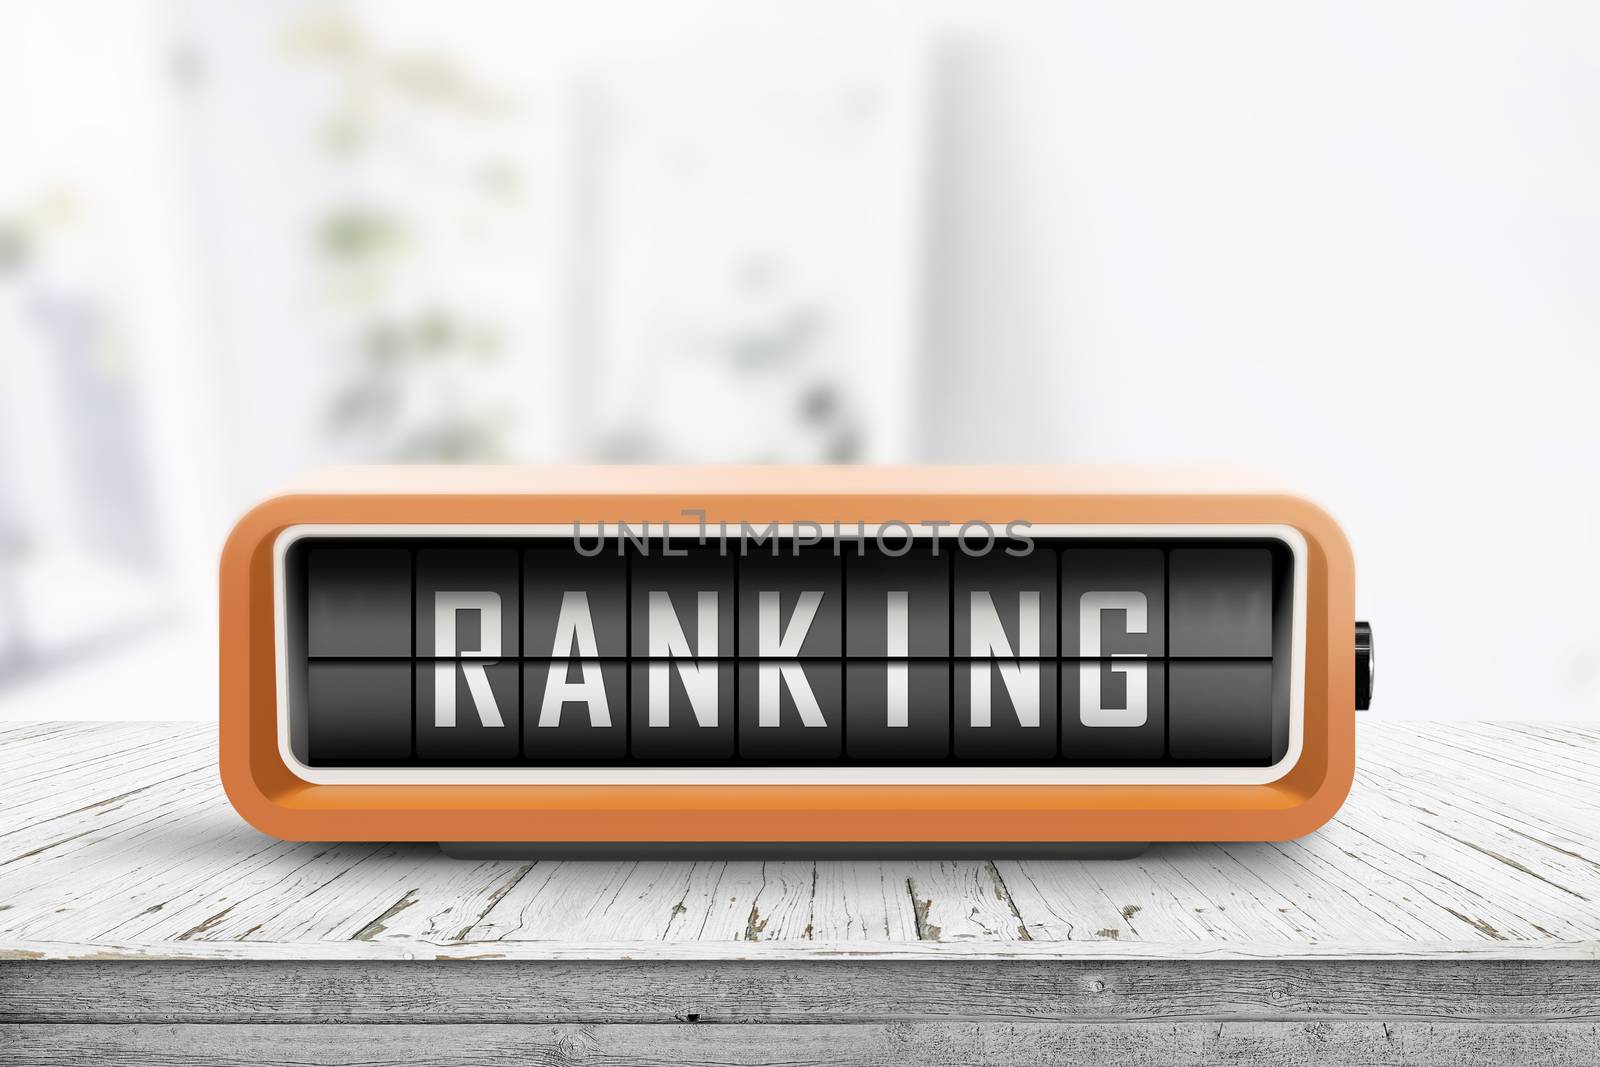 Ranking sign on a wooden table with planks in a bright living room